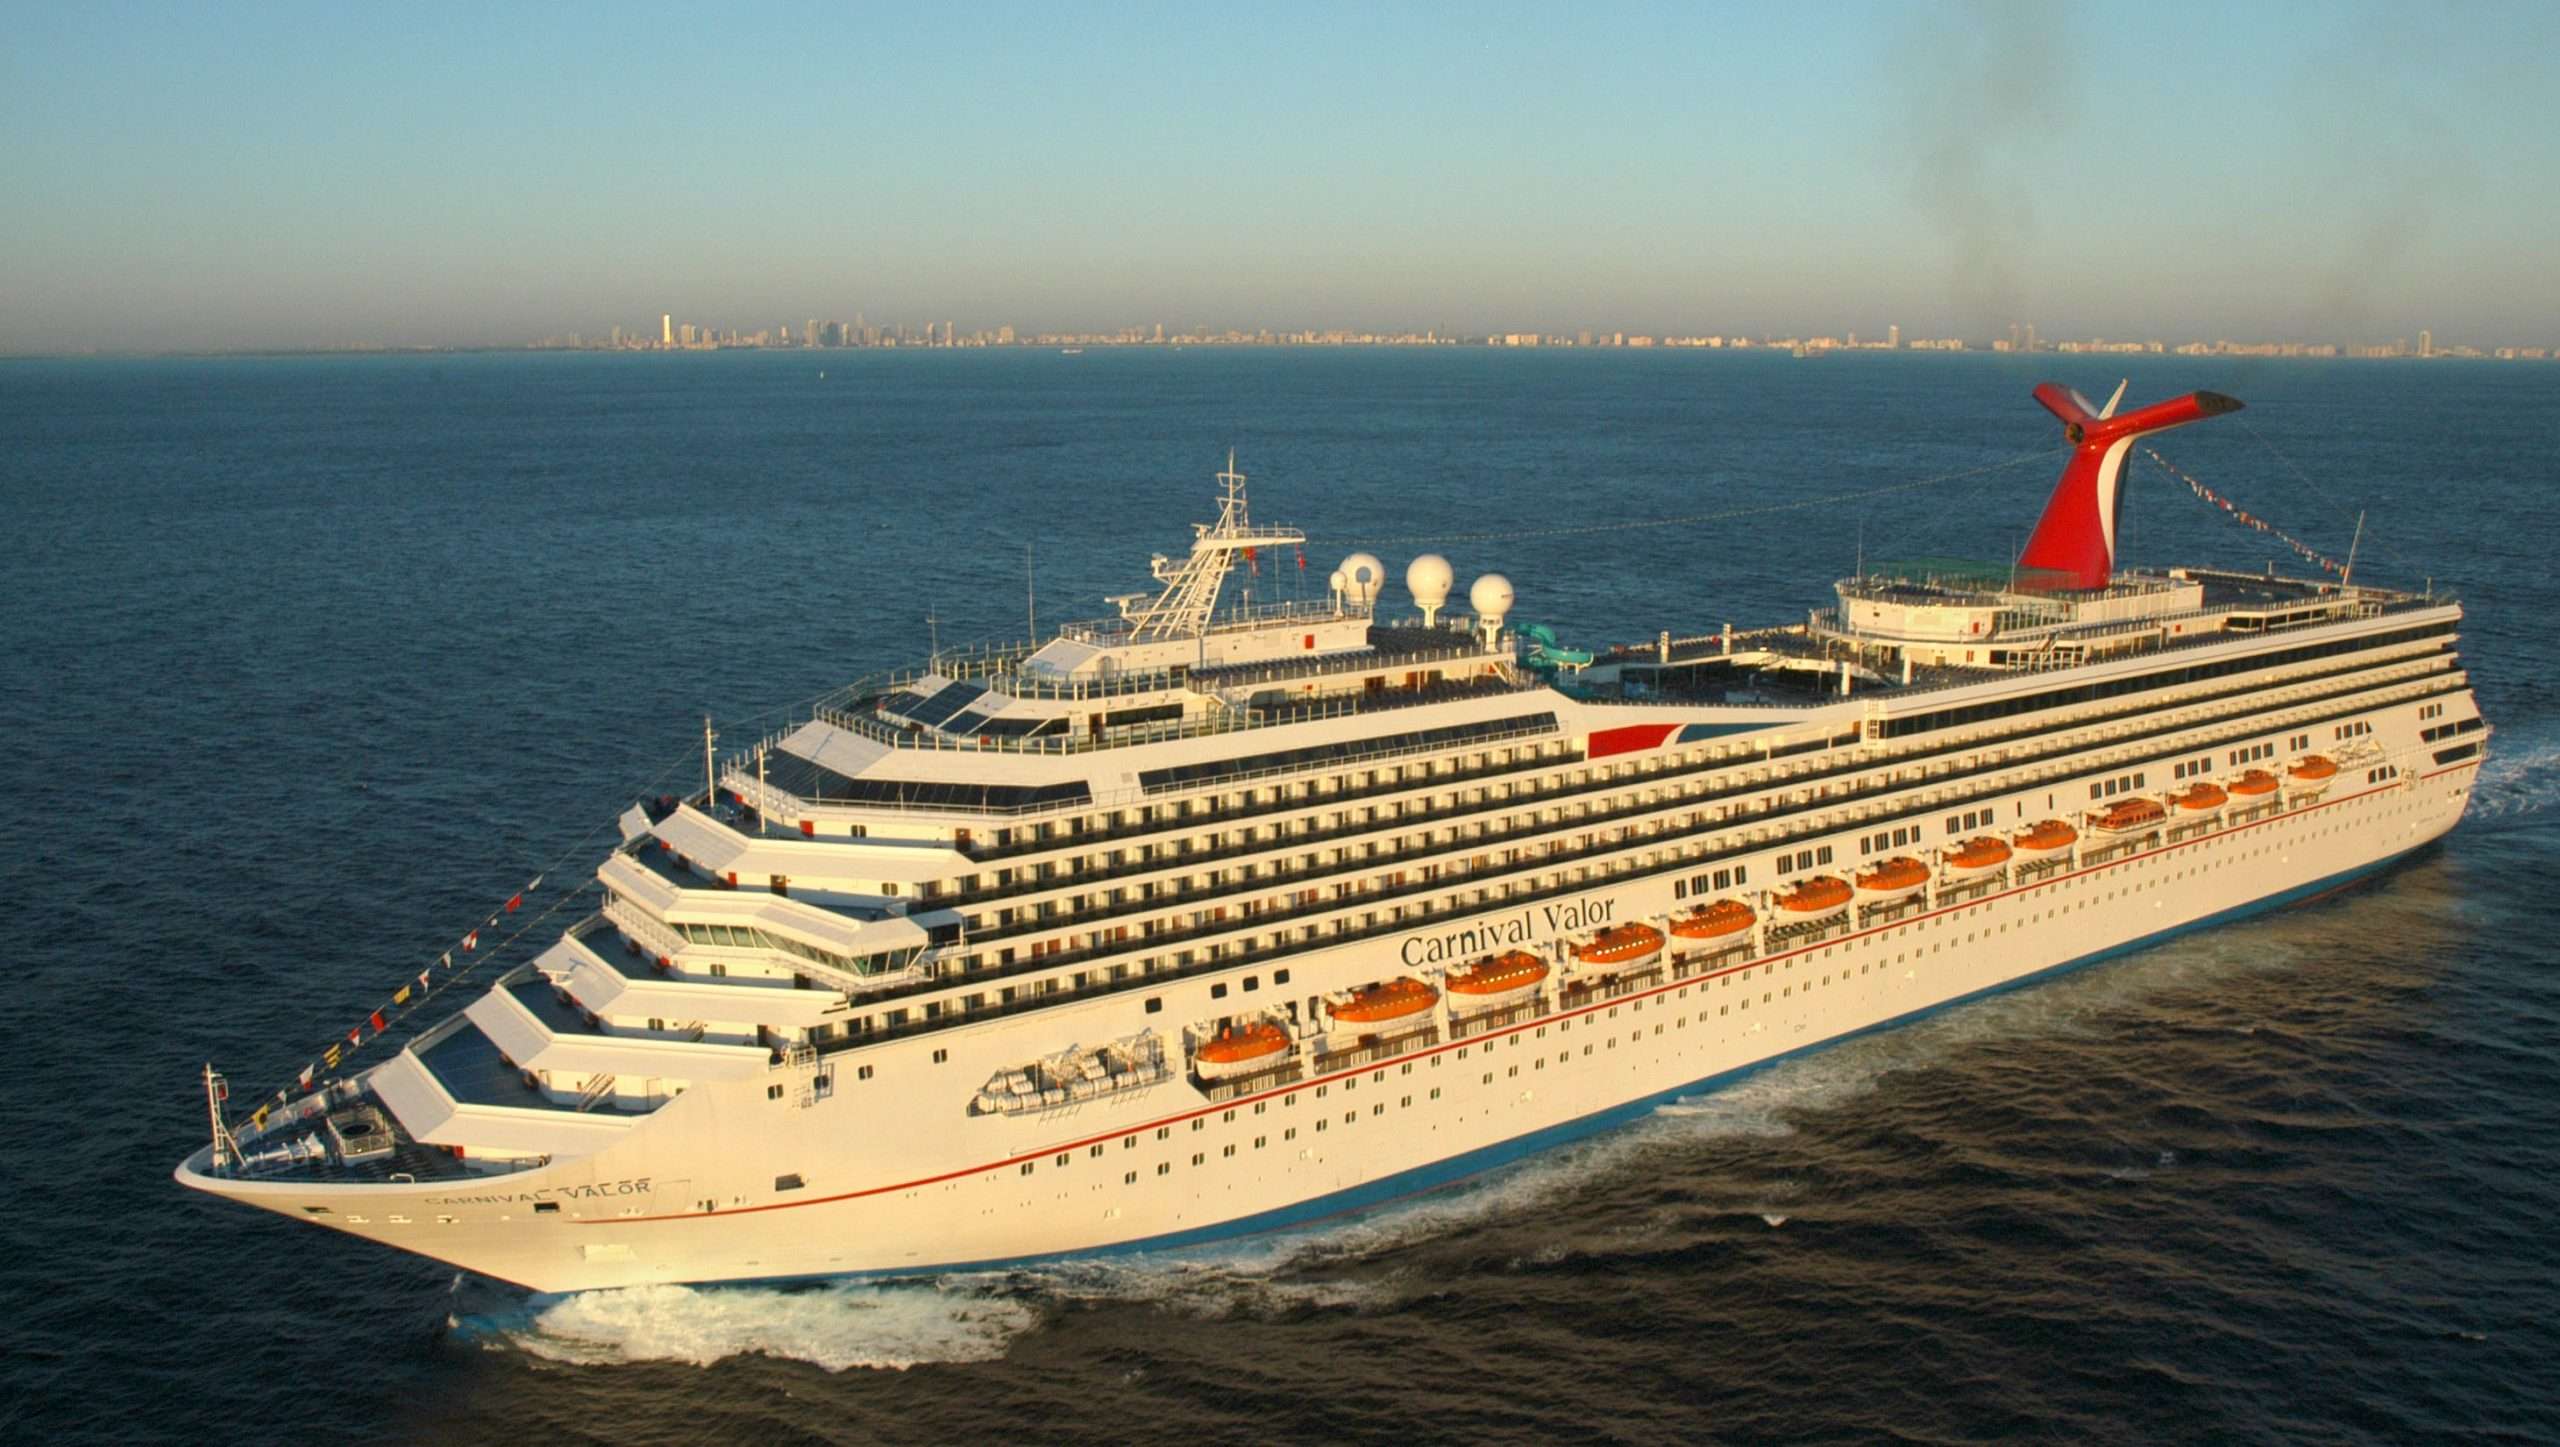 Cruises out of Galveston, Texas could resume by Saturday